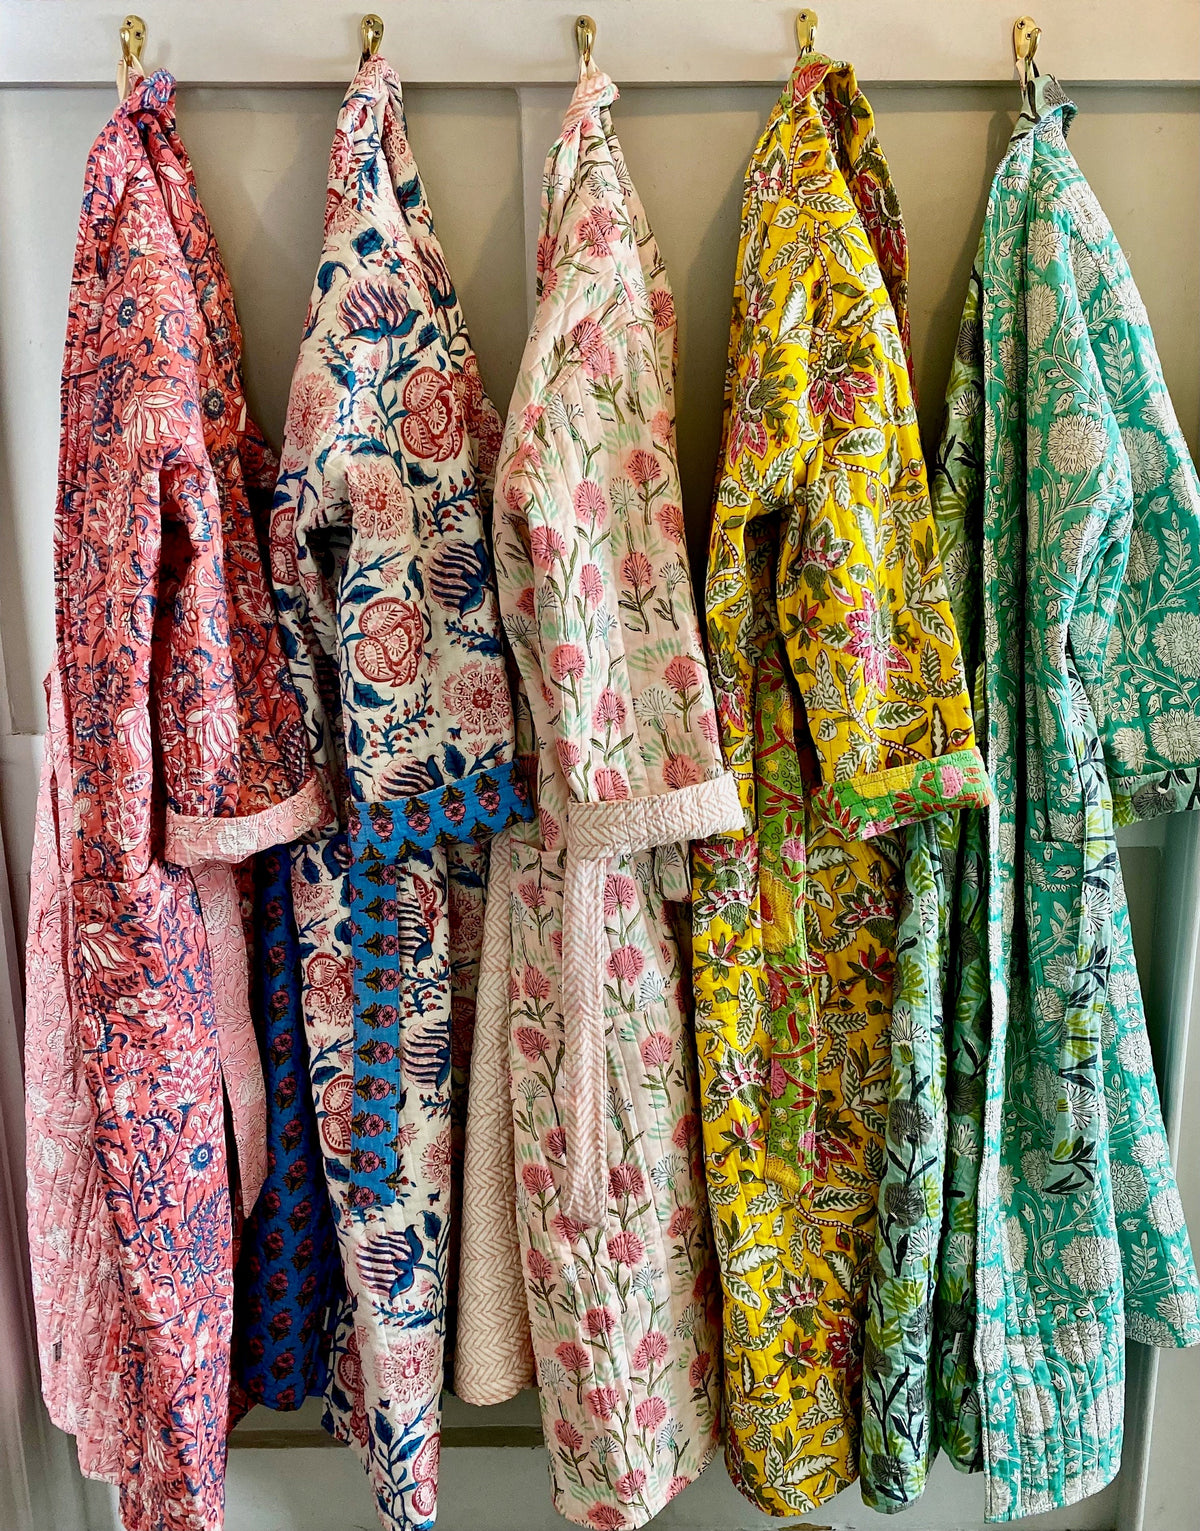 Floral Print Japanese Kimono Robe For Women Long Sleeve Sleepwear Dress For  Shower, Spa, And Home Wear From Youmiguo, $21.08 | DHgate.Com